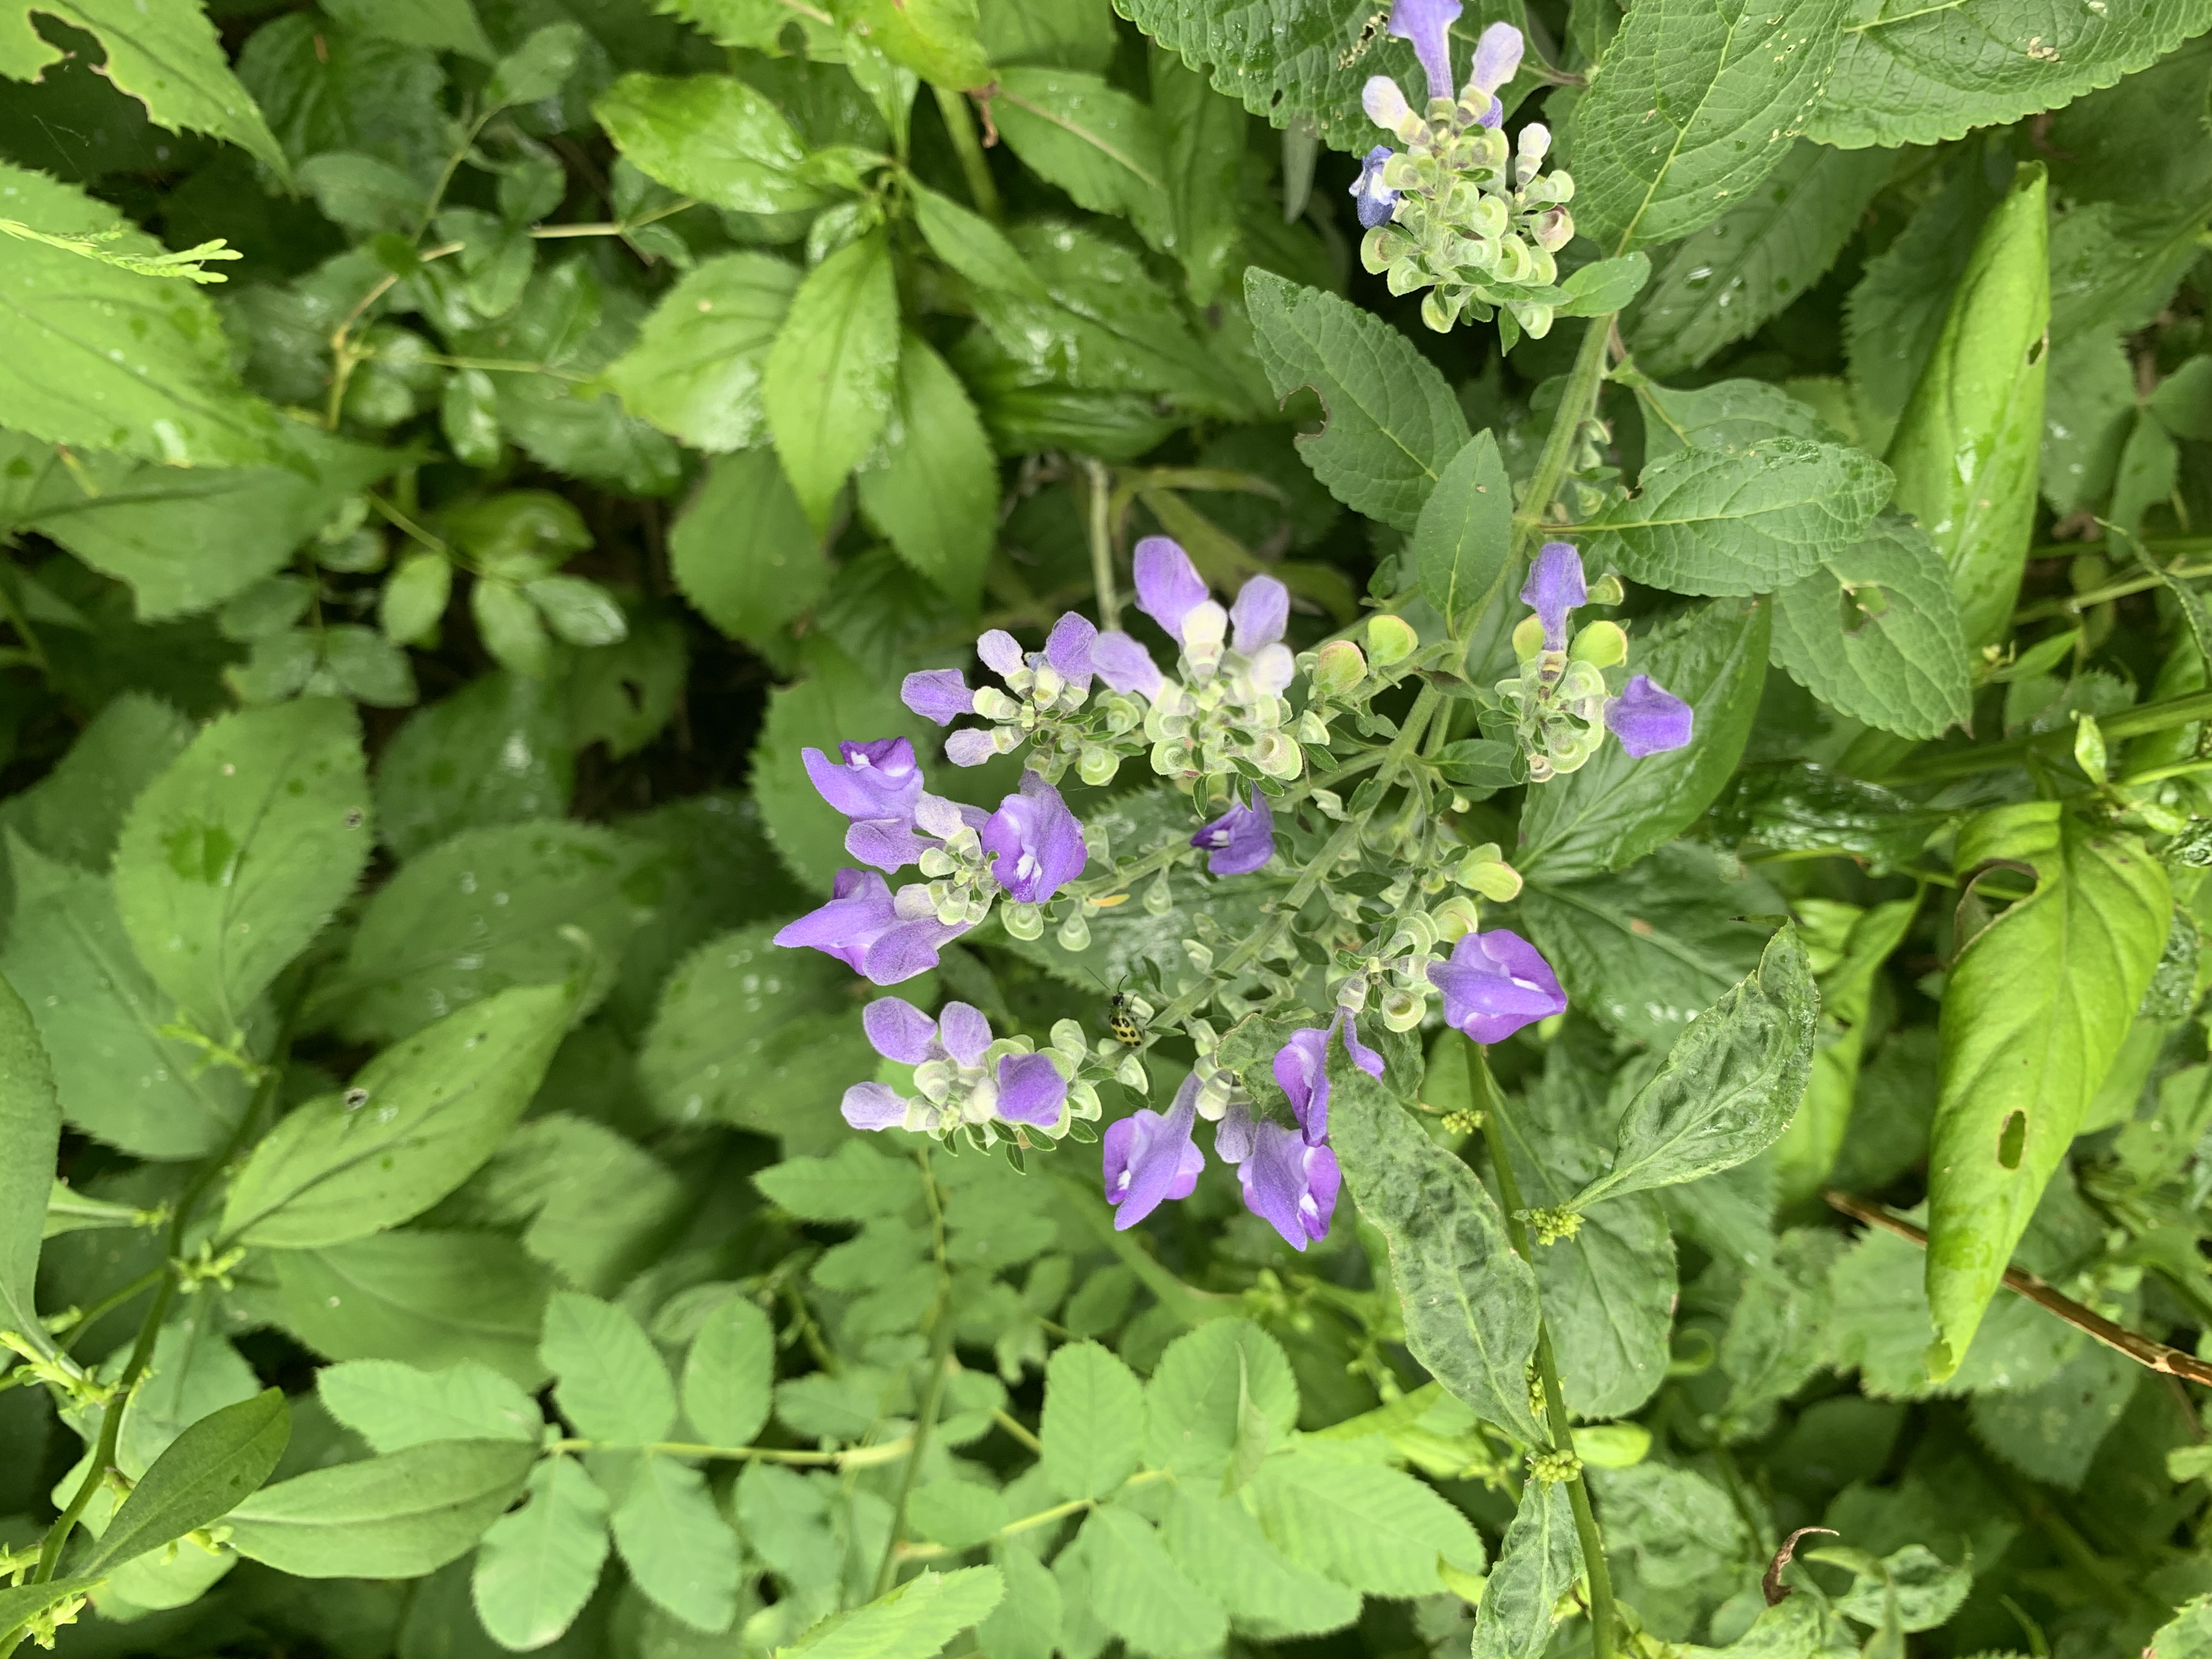 A green plant with purple flowers